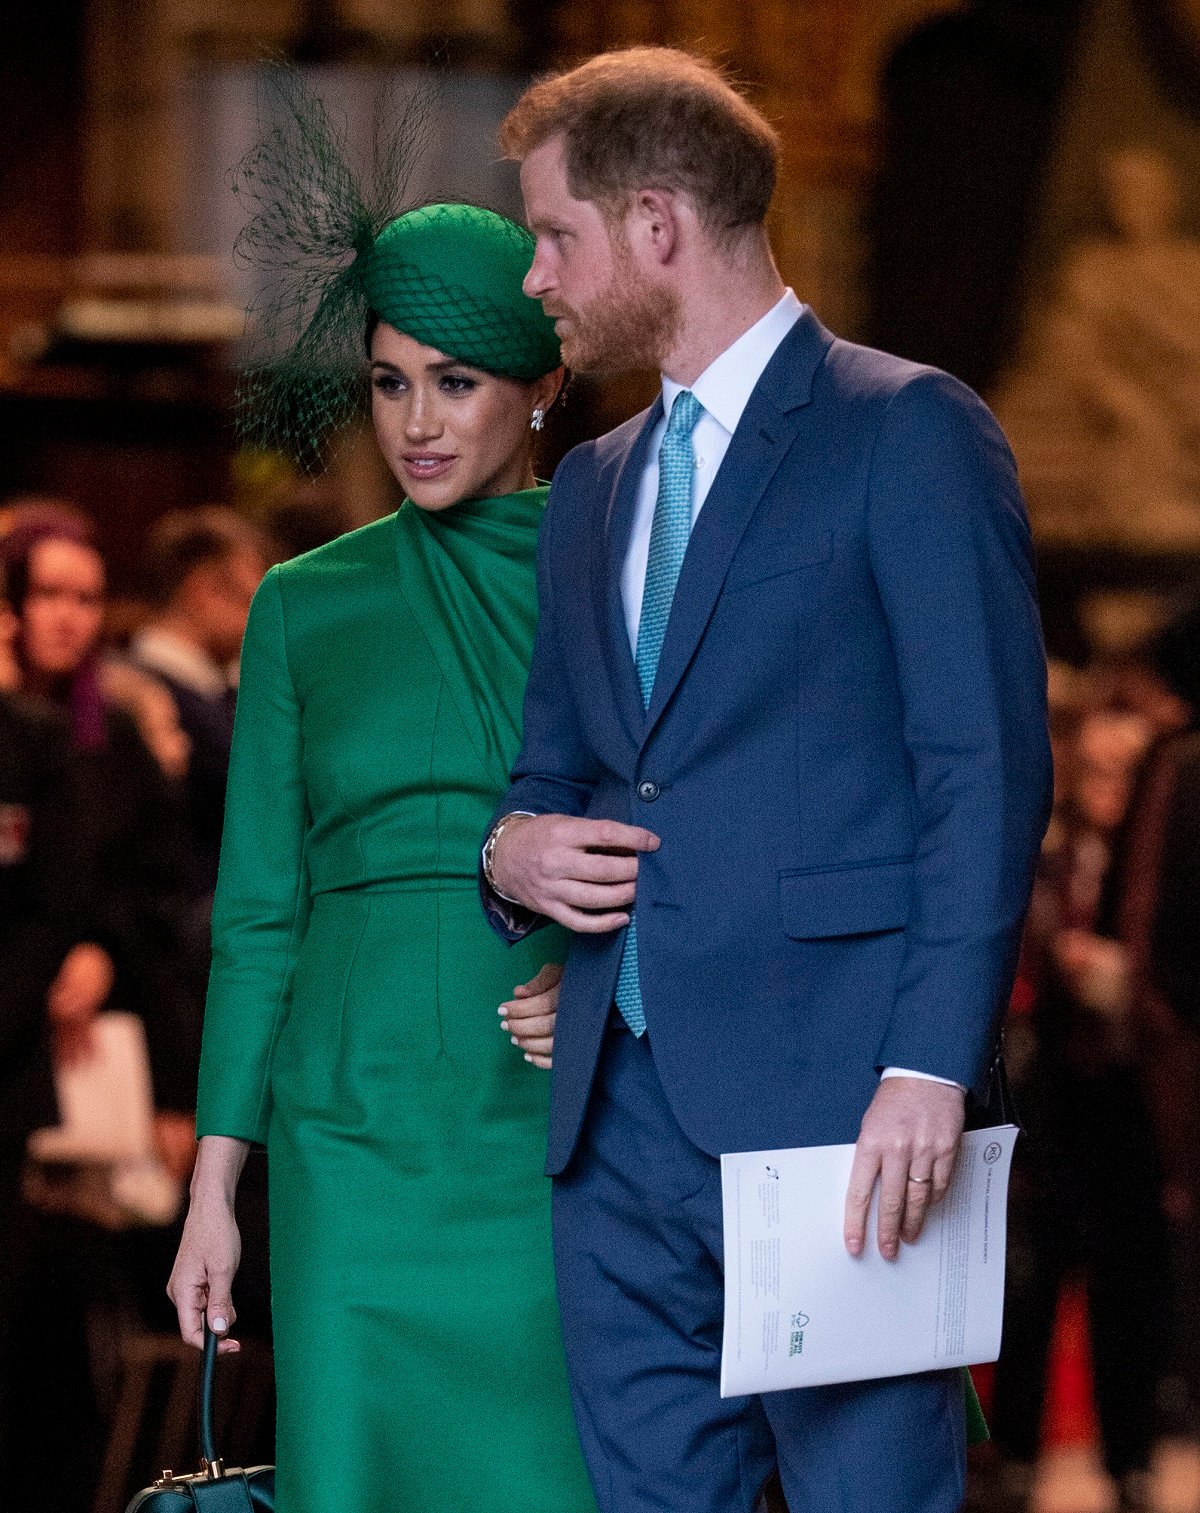 Prince Harry and Meghan Markle, who a body language expert says look like they 'haven't slept' and 'want to disappear,' pictured during their final royal engagement at Westminster Abbey